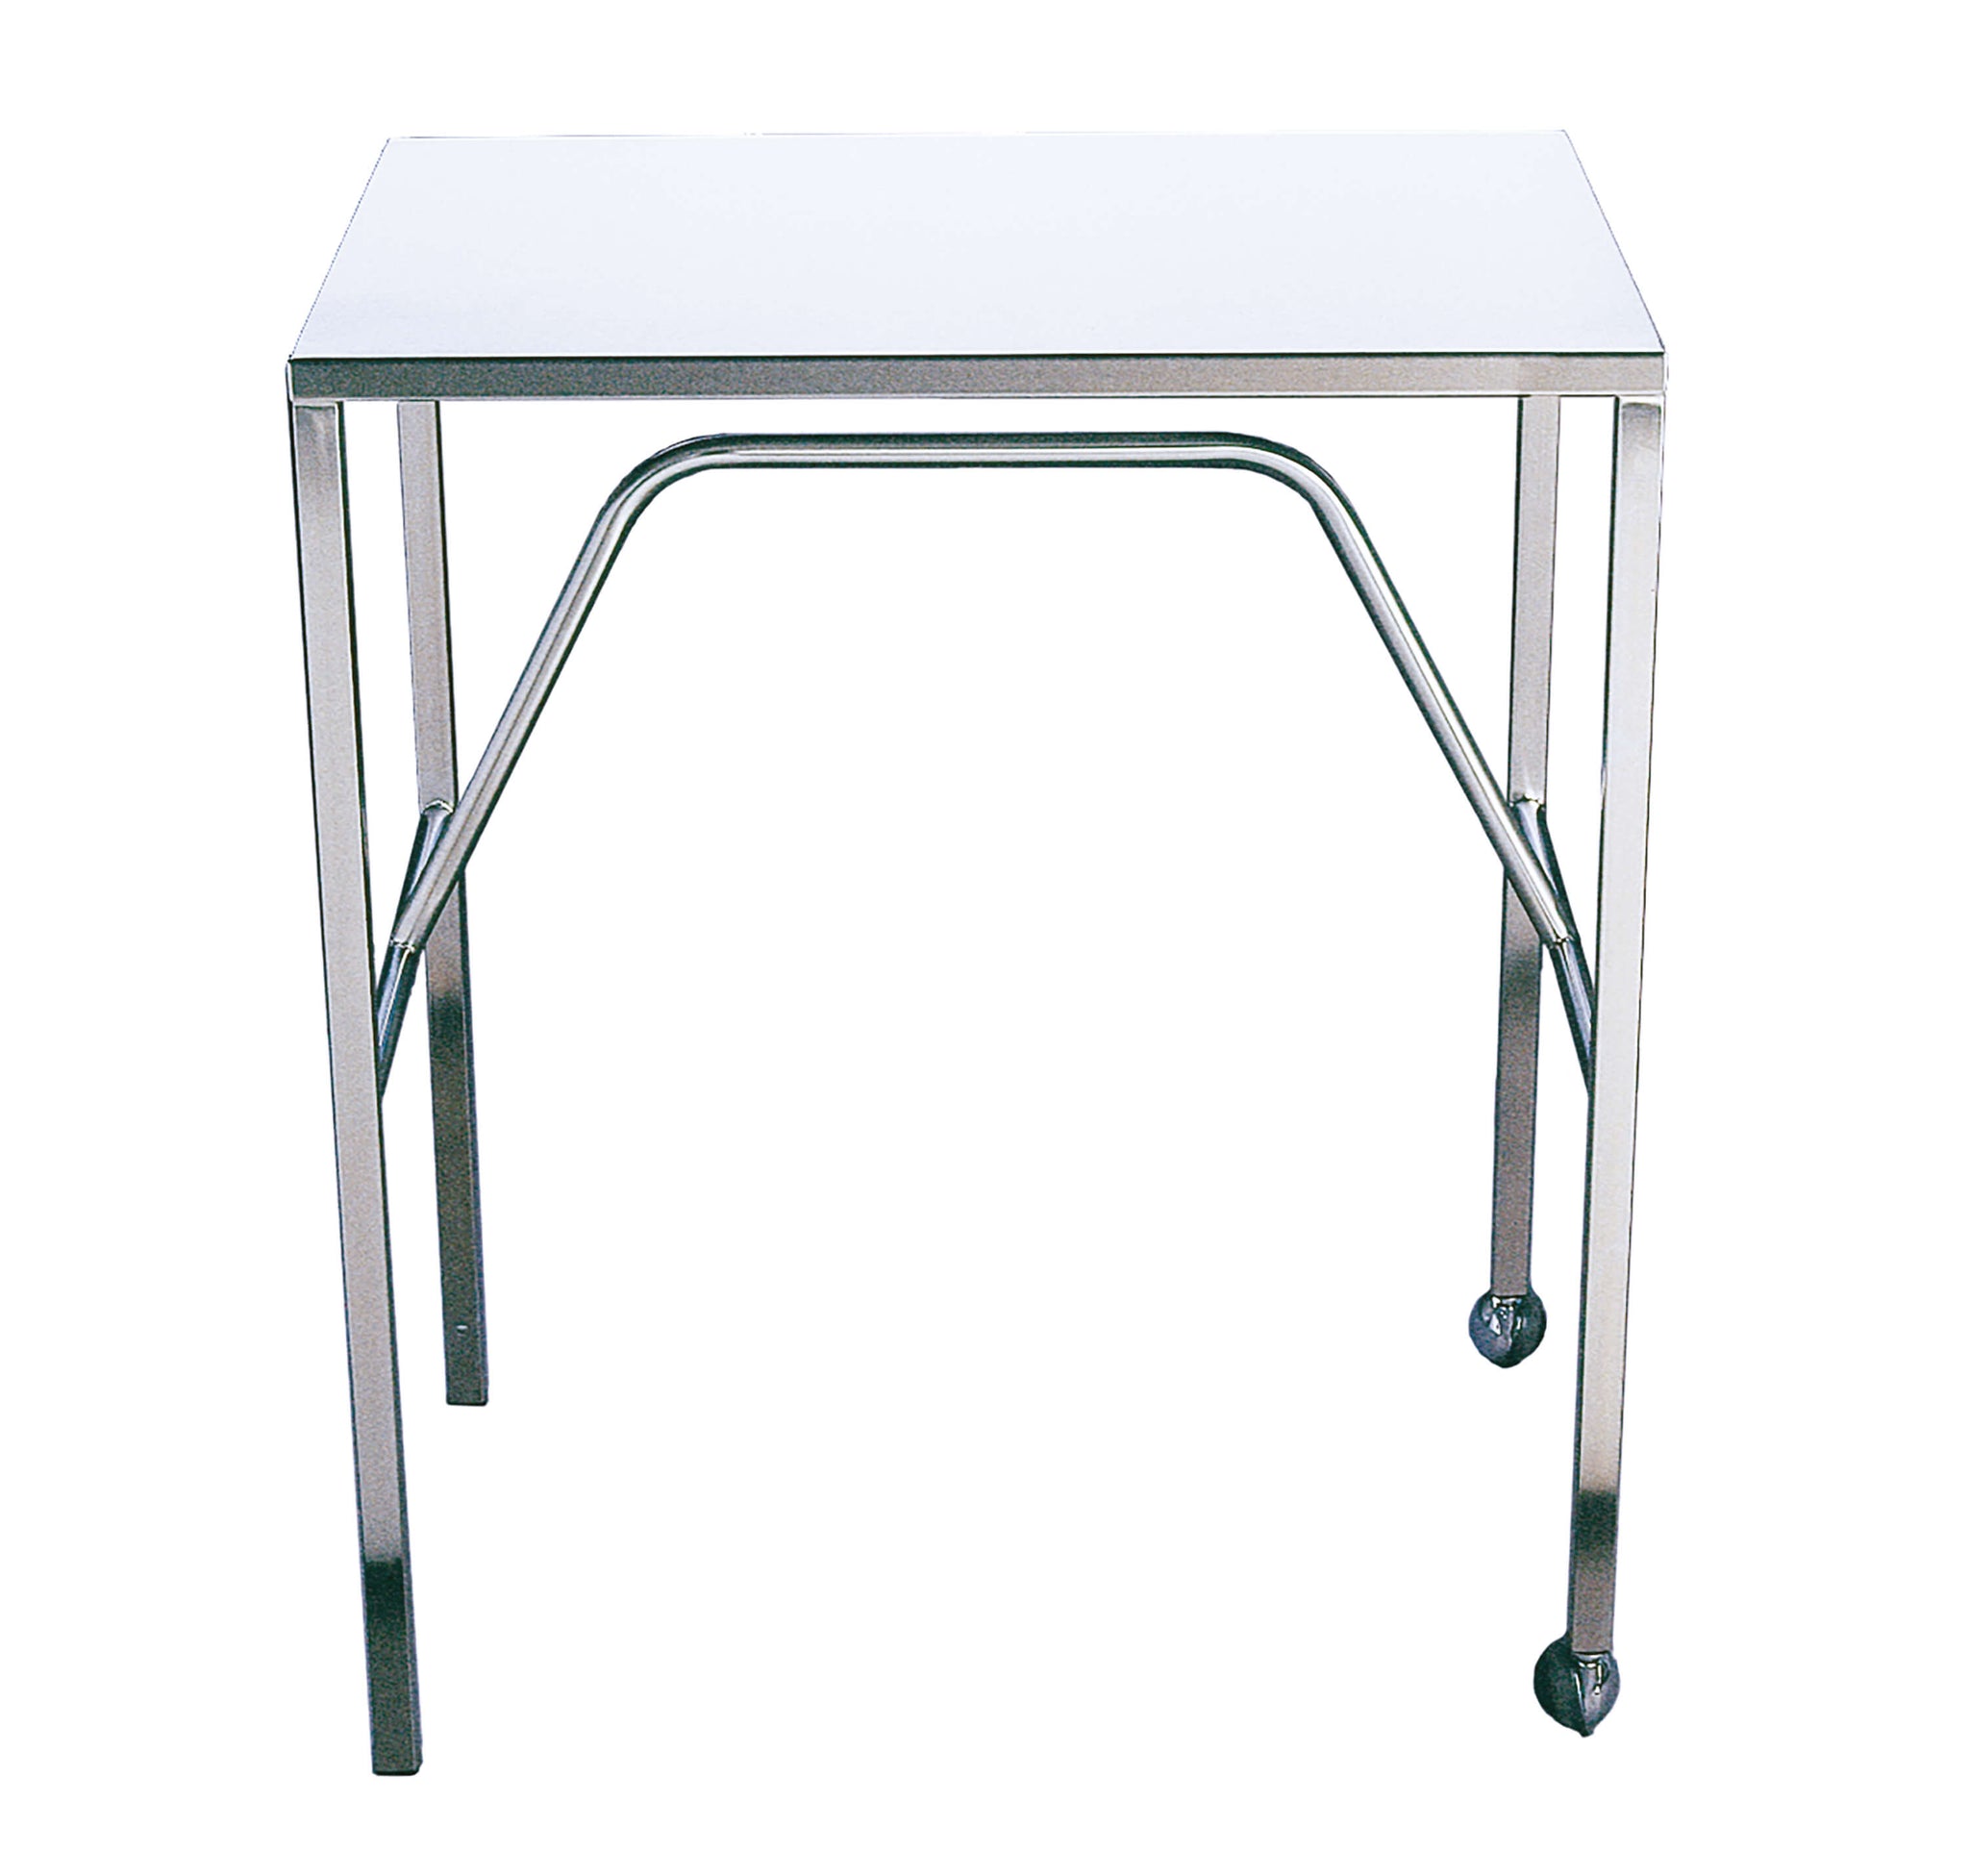 Arm Table- Fixed Height, 750 X 490 X 900 mm